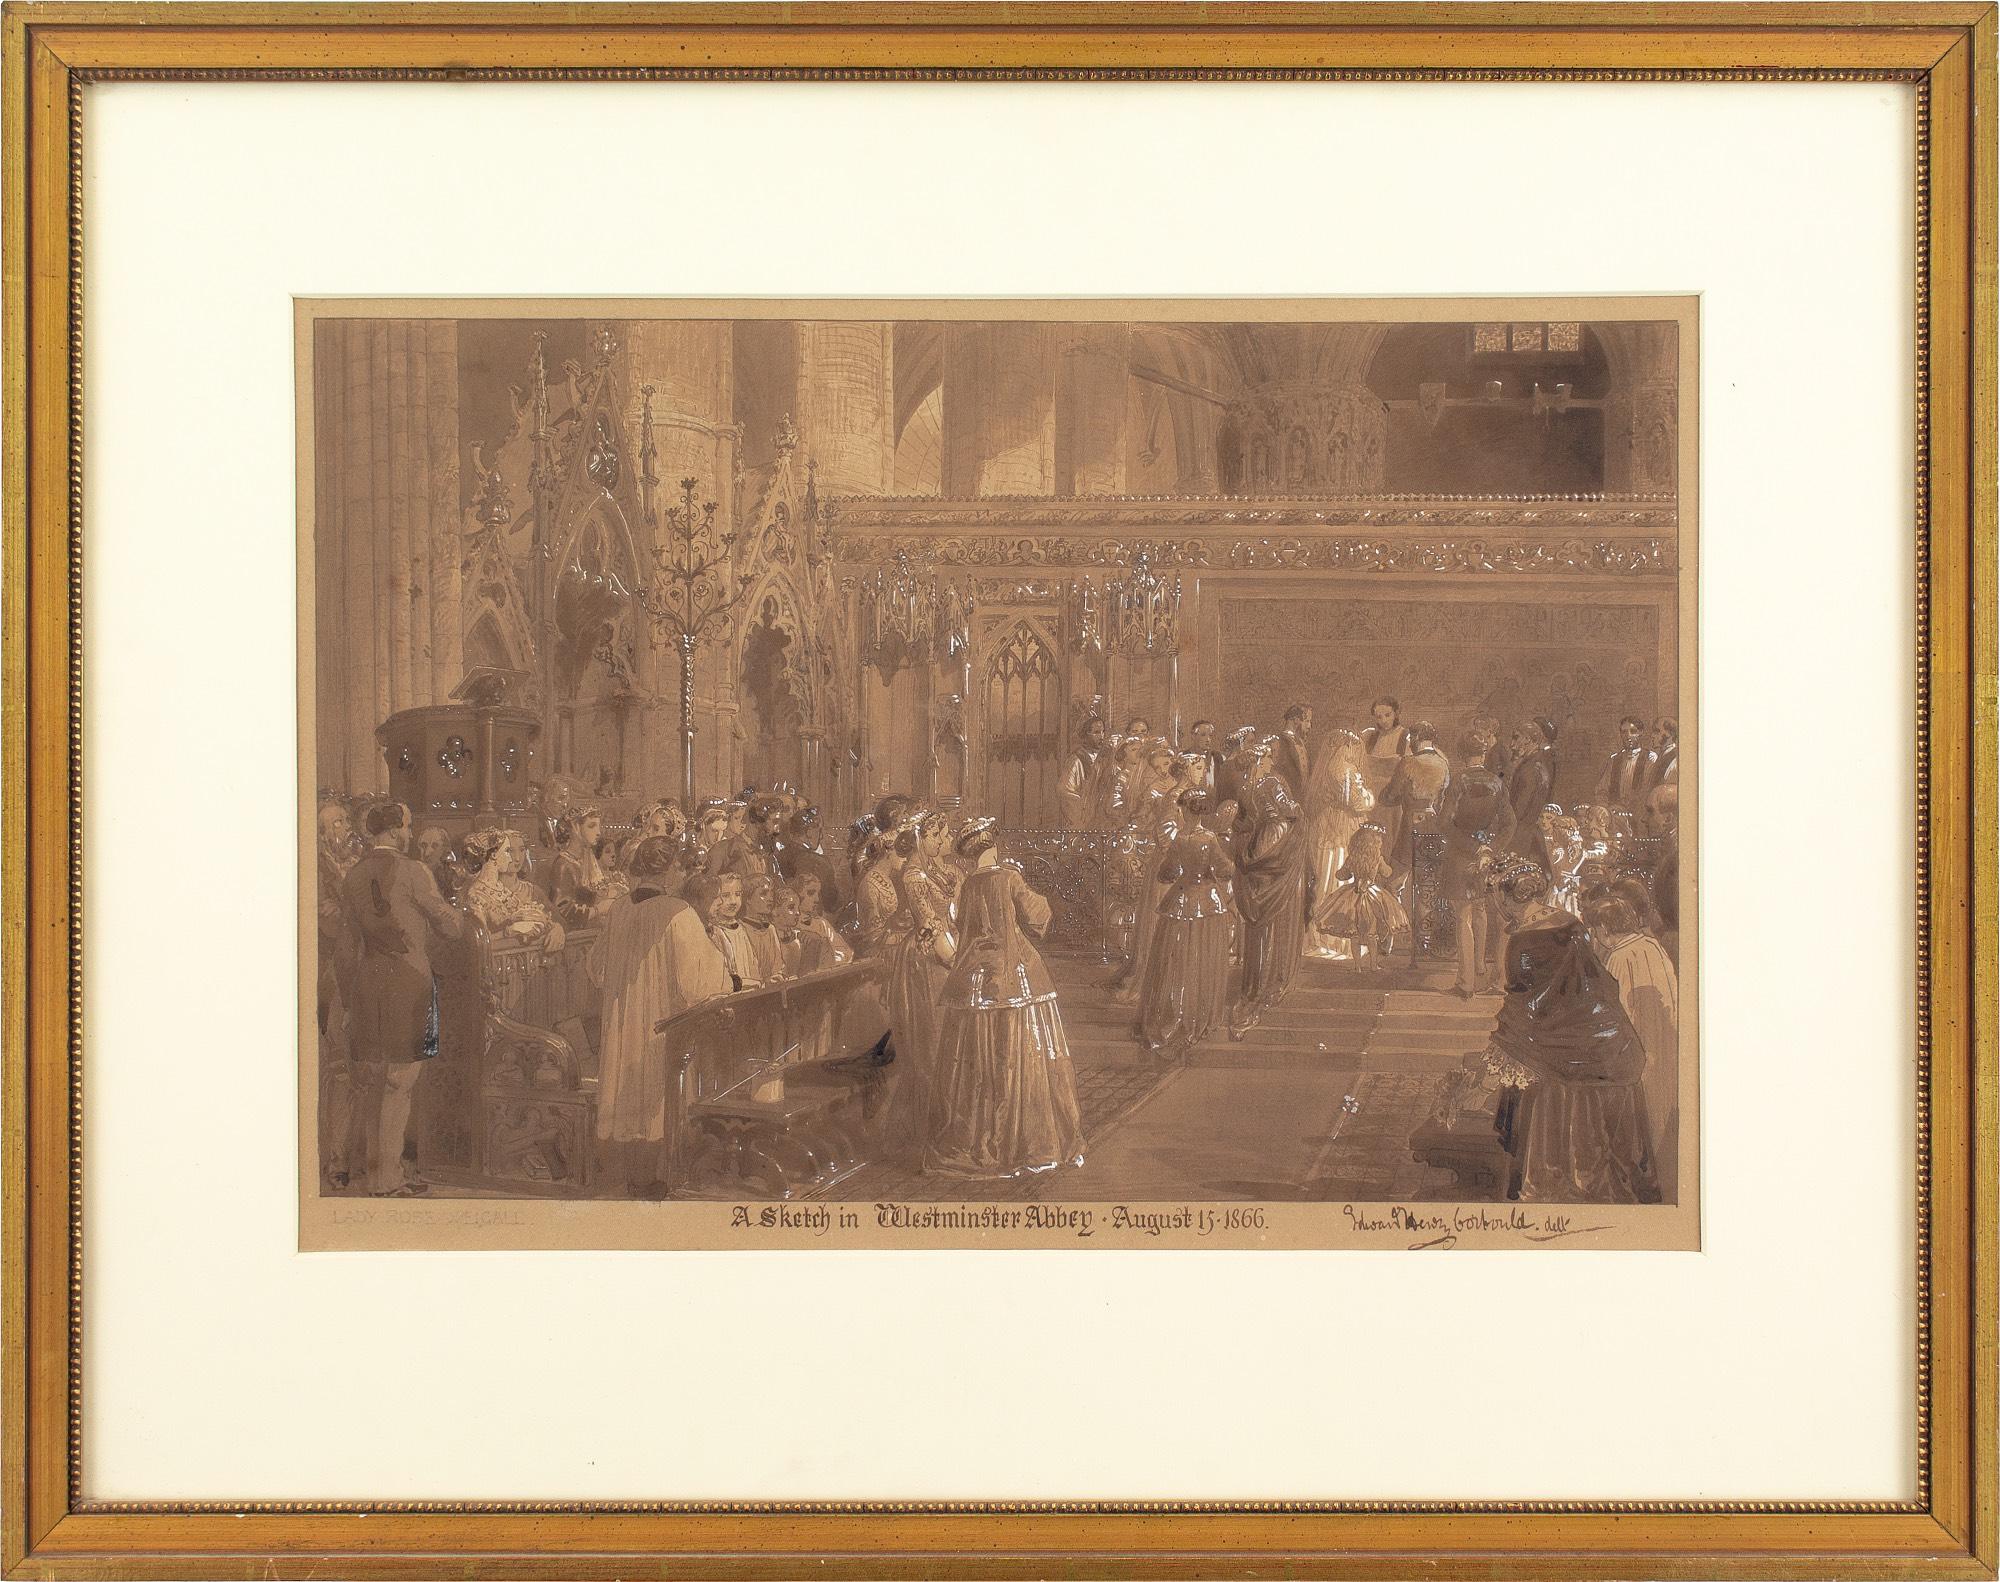 This mid-19th-century watercolour by British artist Edward Henry Corbould (1815-1905) illustrates the impressive wedding of his good friend Henry Weigall (1829-1925) and Lady Rose Fane (1834-1921). It was presented to Weigall and remained with the